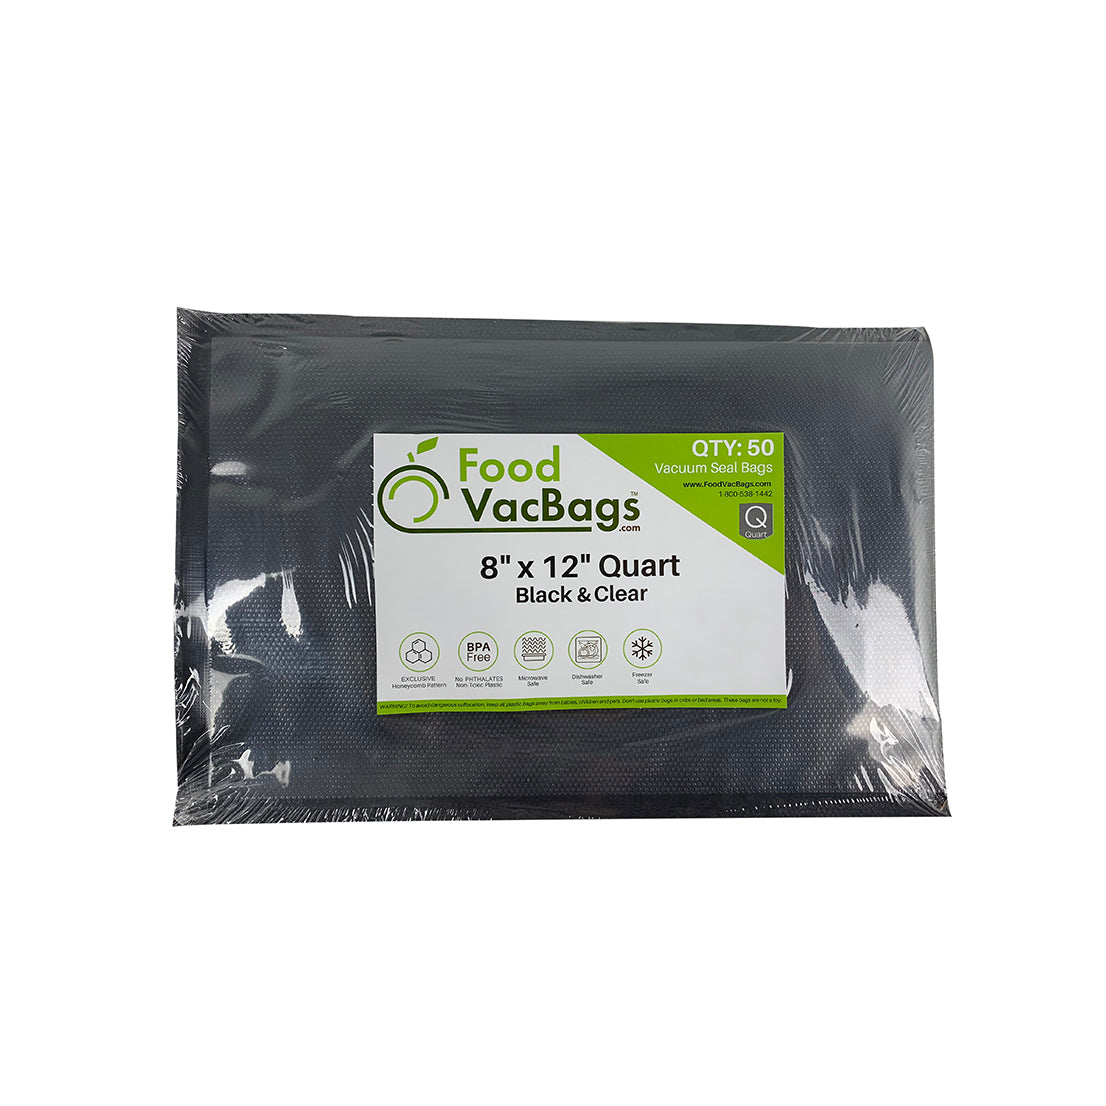 8 X 12 Quart Bags - Black Back Clear Front - 50 count – FoodVacBags